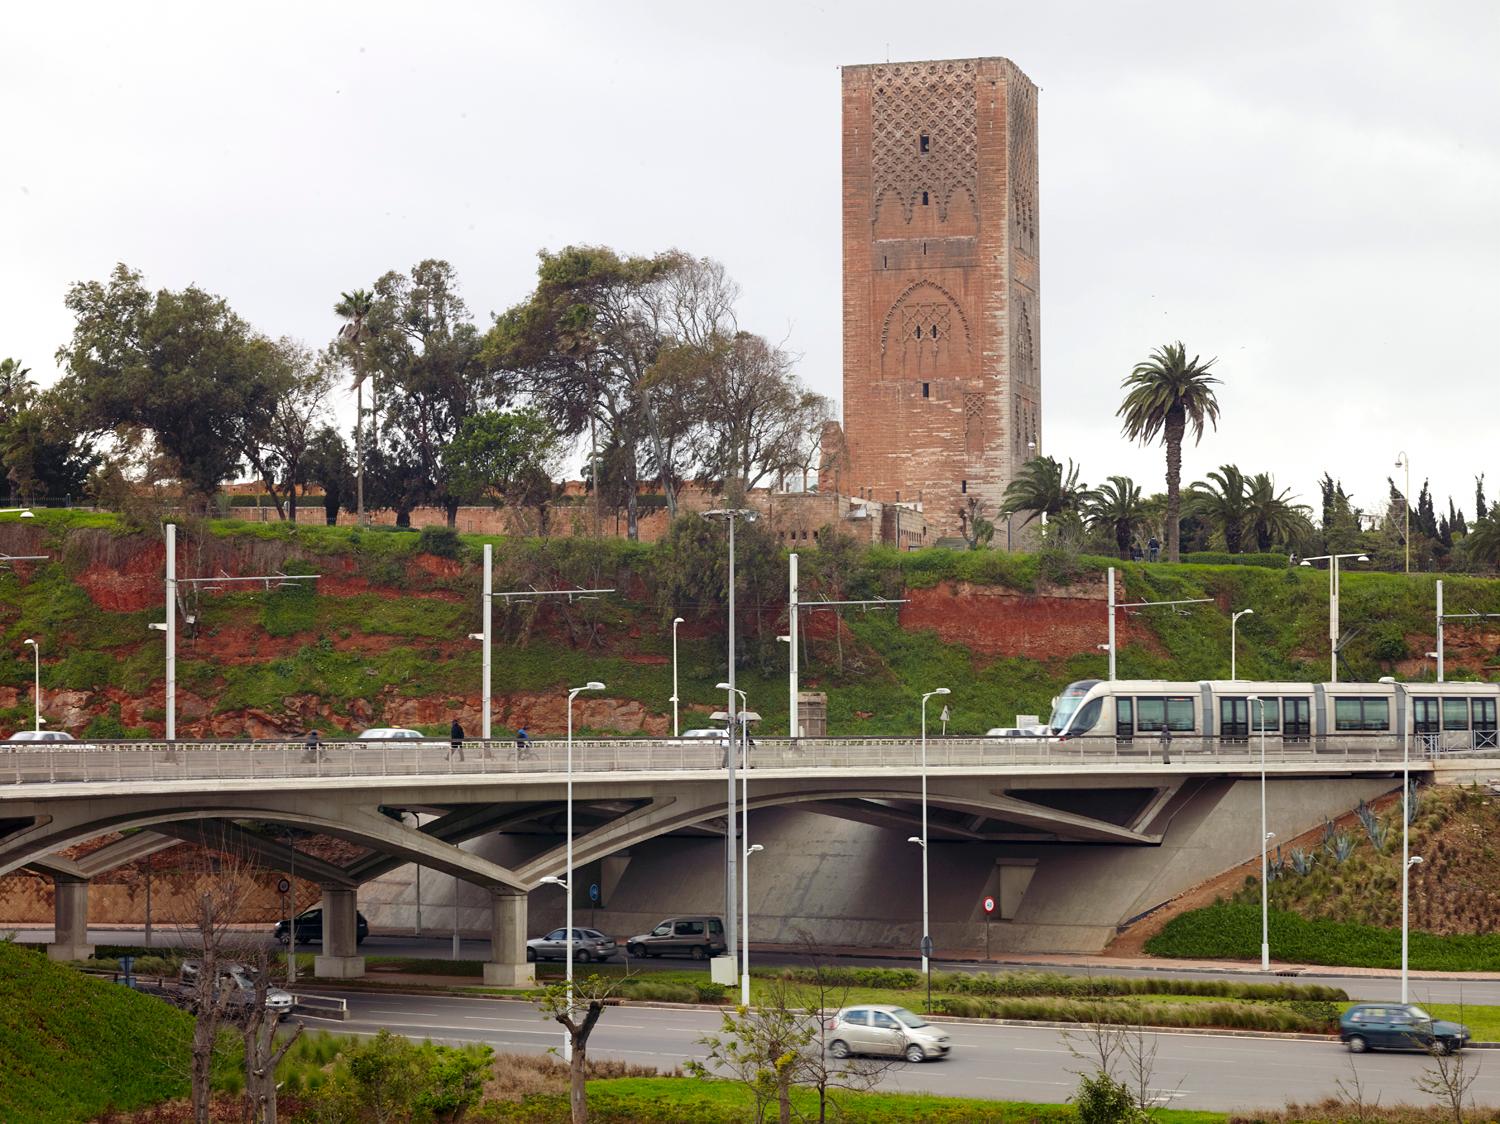 Viaduct with the Hassan II Tower in the background